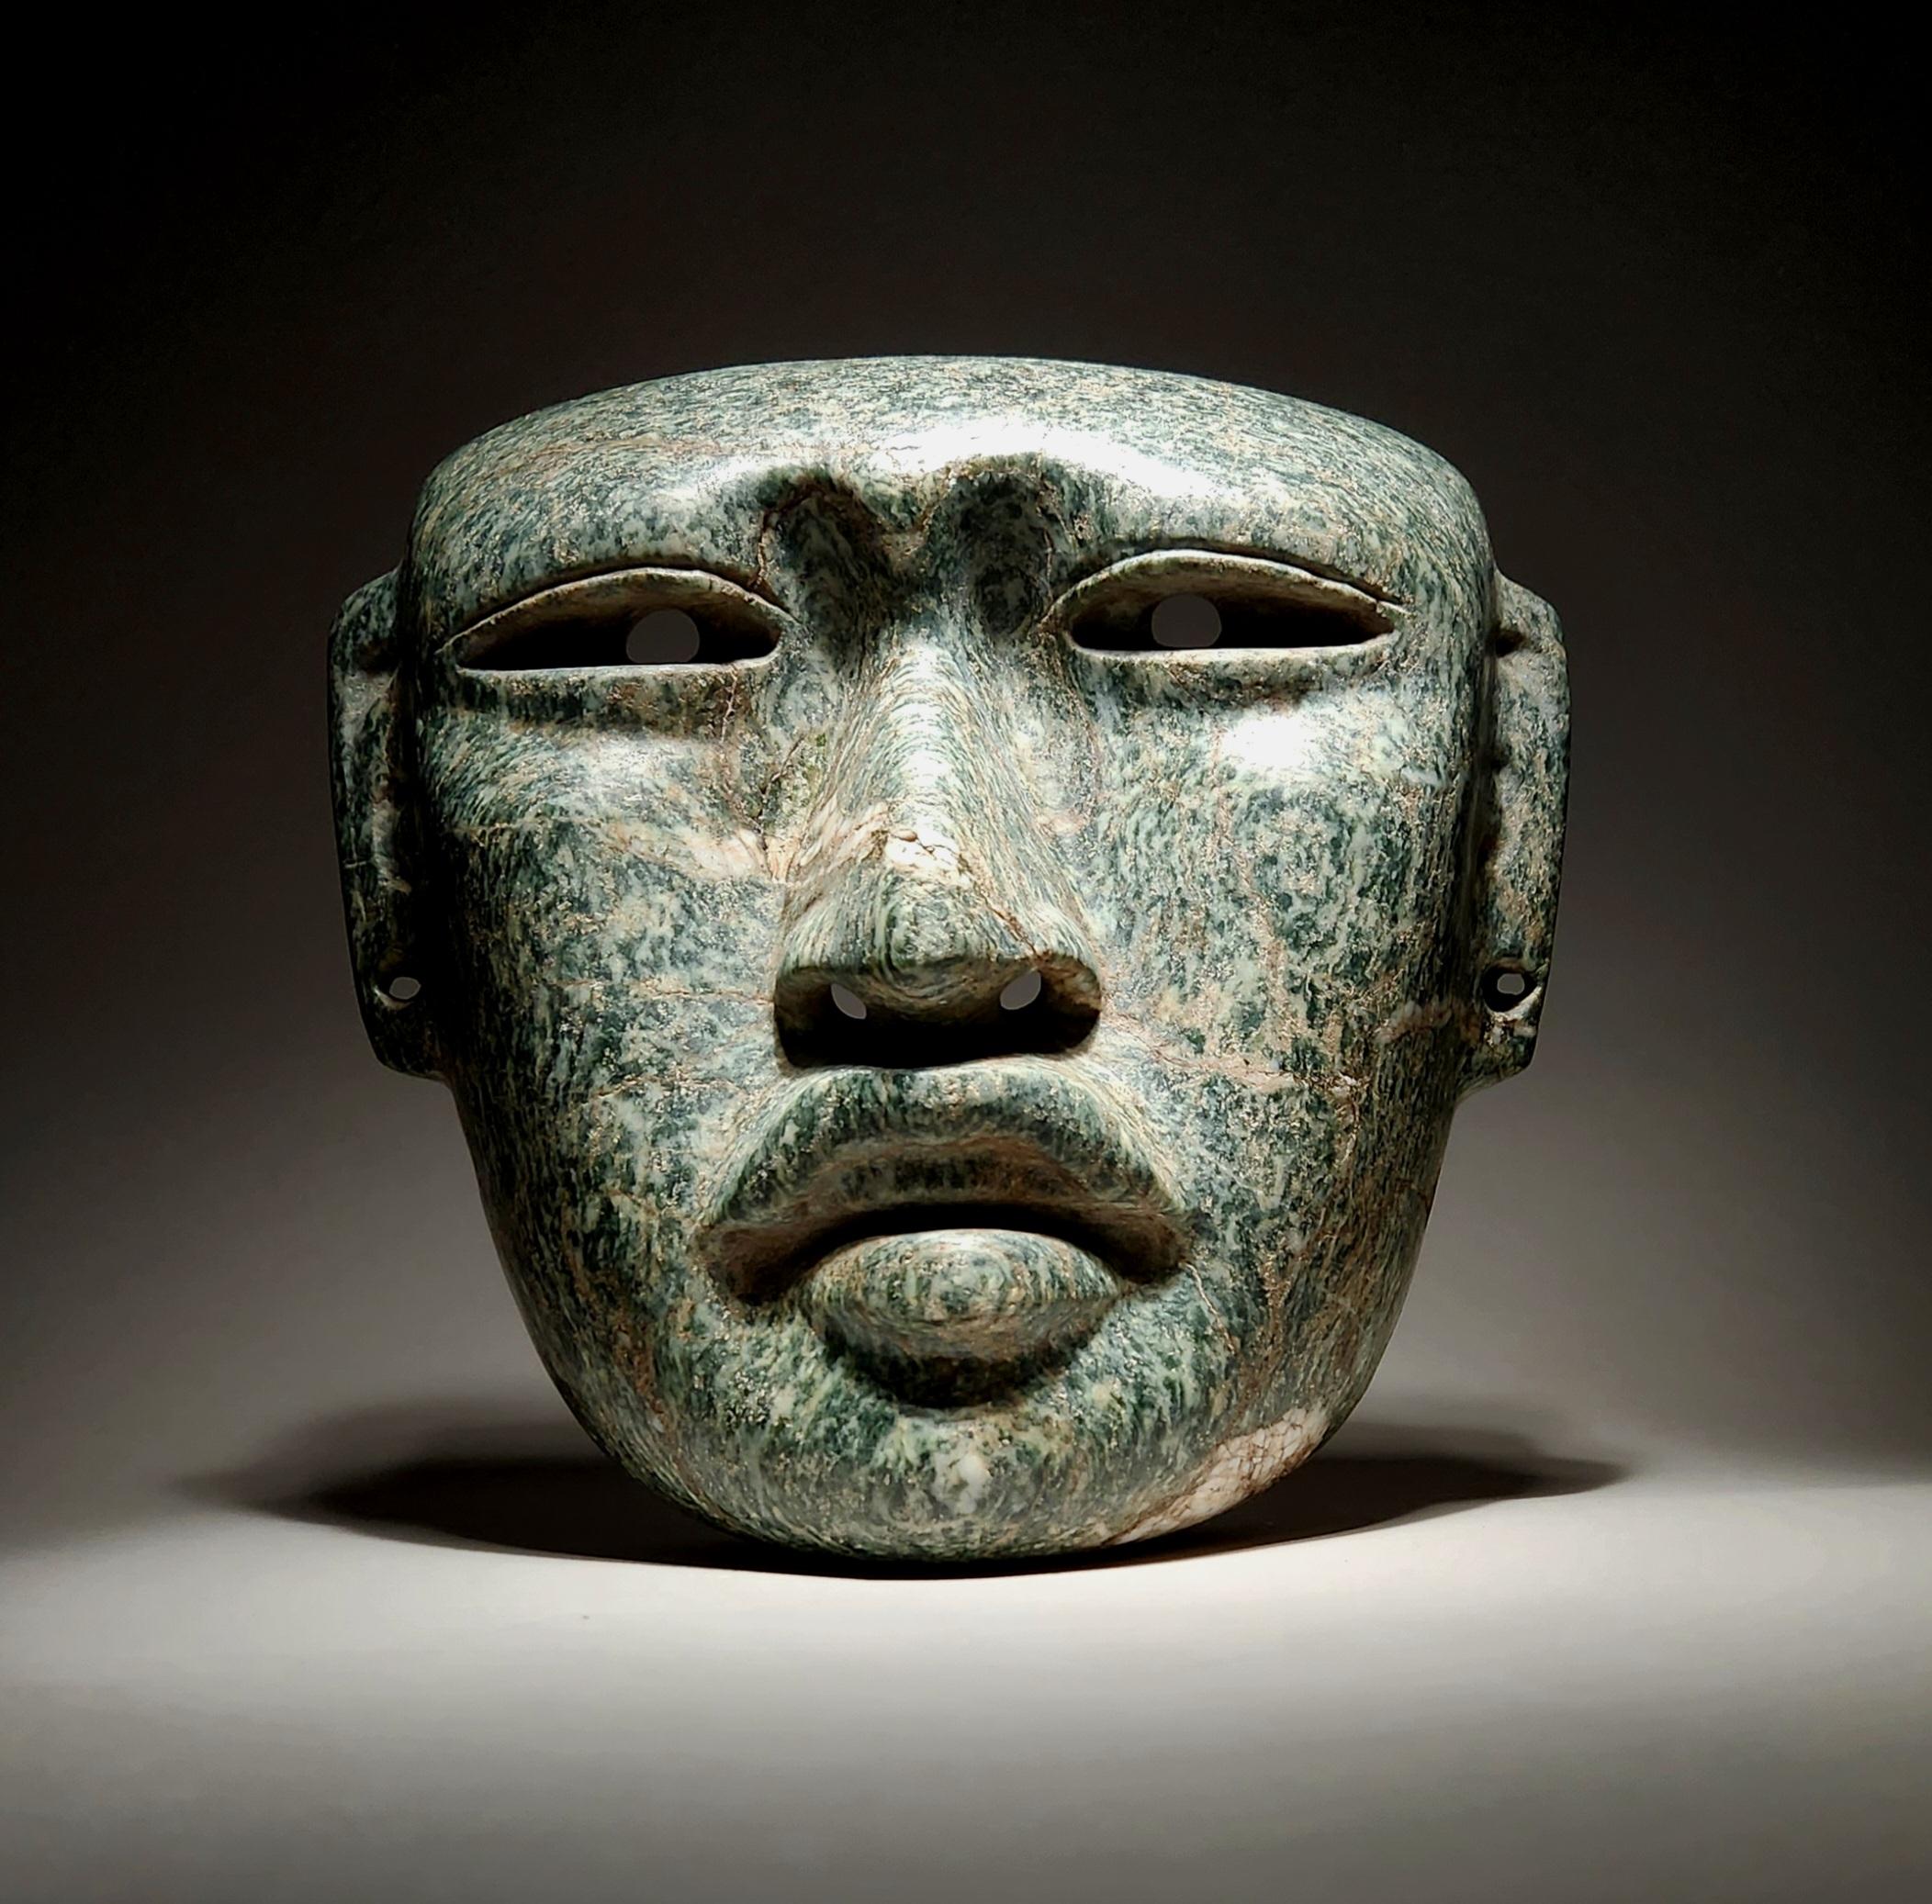 A large and powerful portrait mask depicting an important Olmec ruler, with a broad face, furrowed brow, rectangular ear flanges, full lips, and a large nose, carved from a variegated green stone with white quartz inclusions, Olmec Culture, Gulf